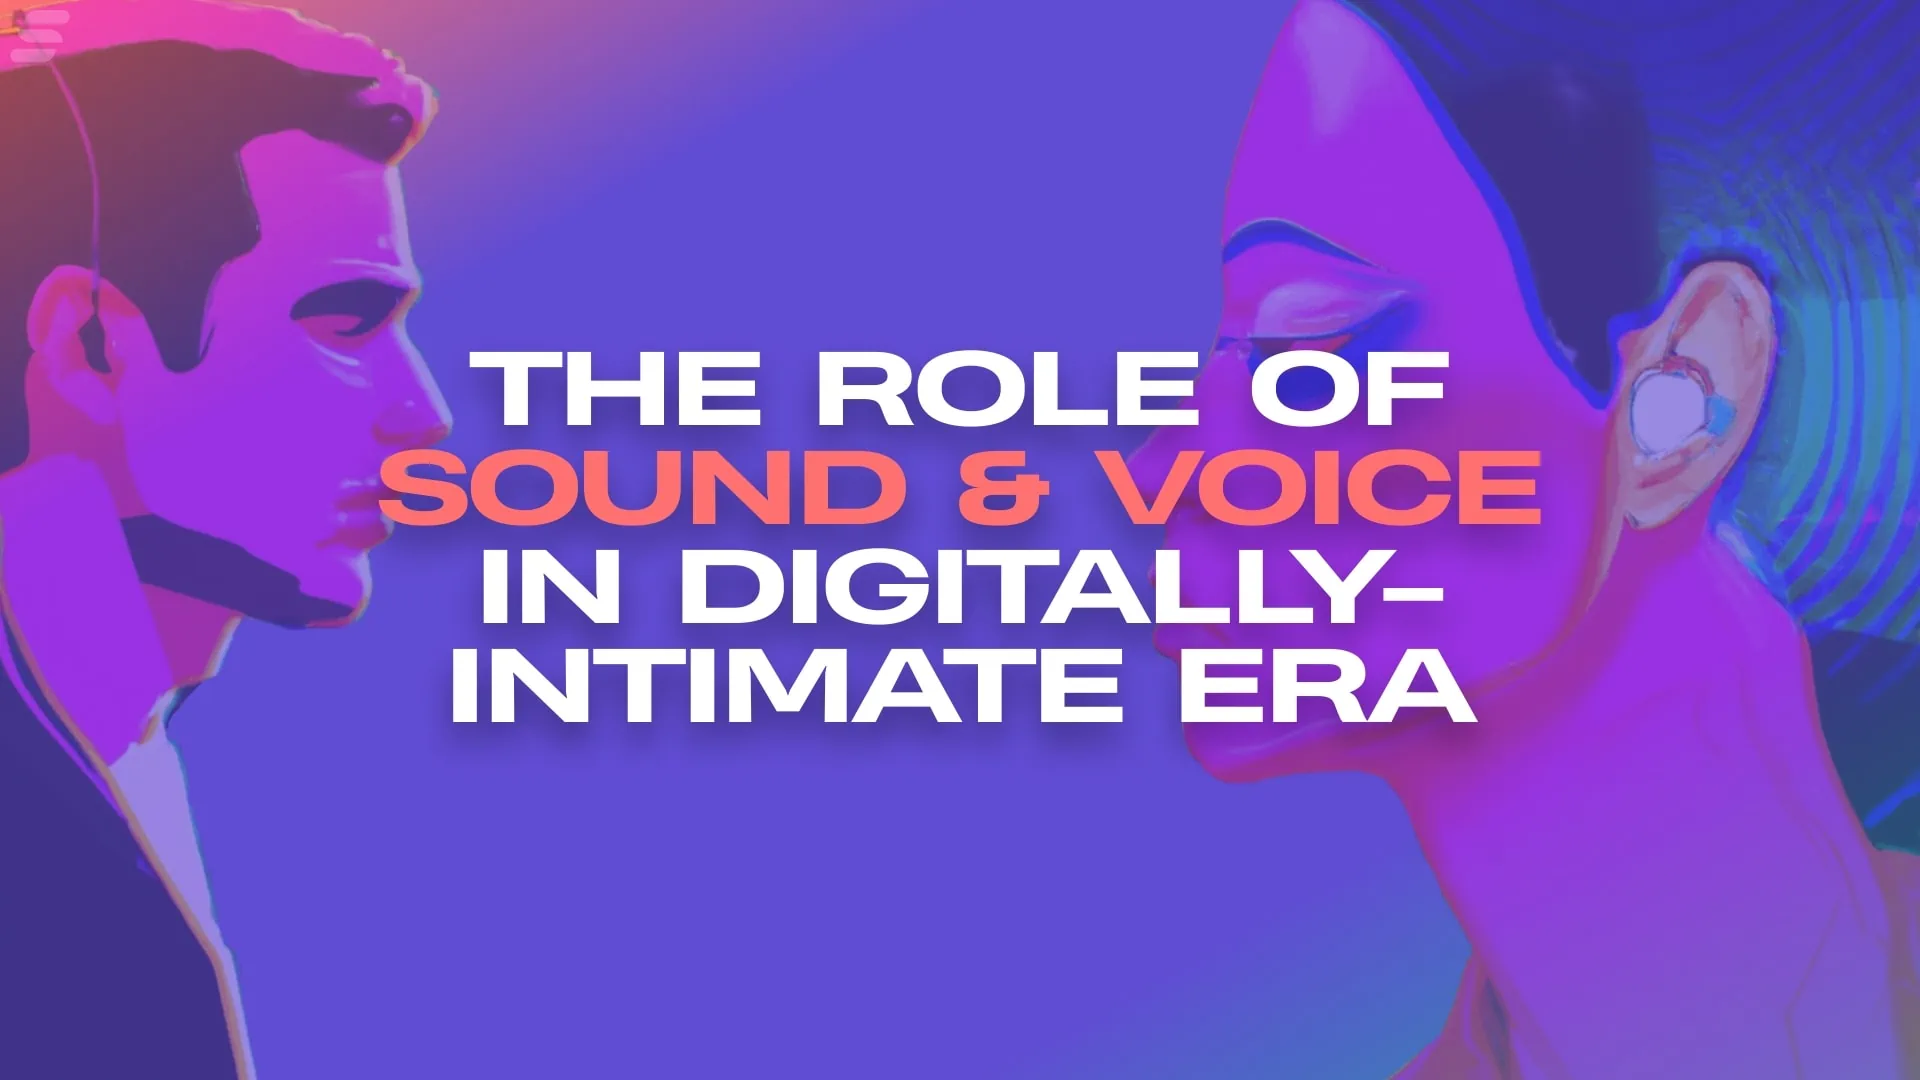 The role of voice and sound in the digitally intimate era.